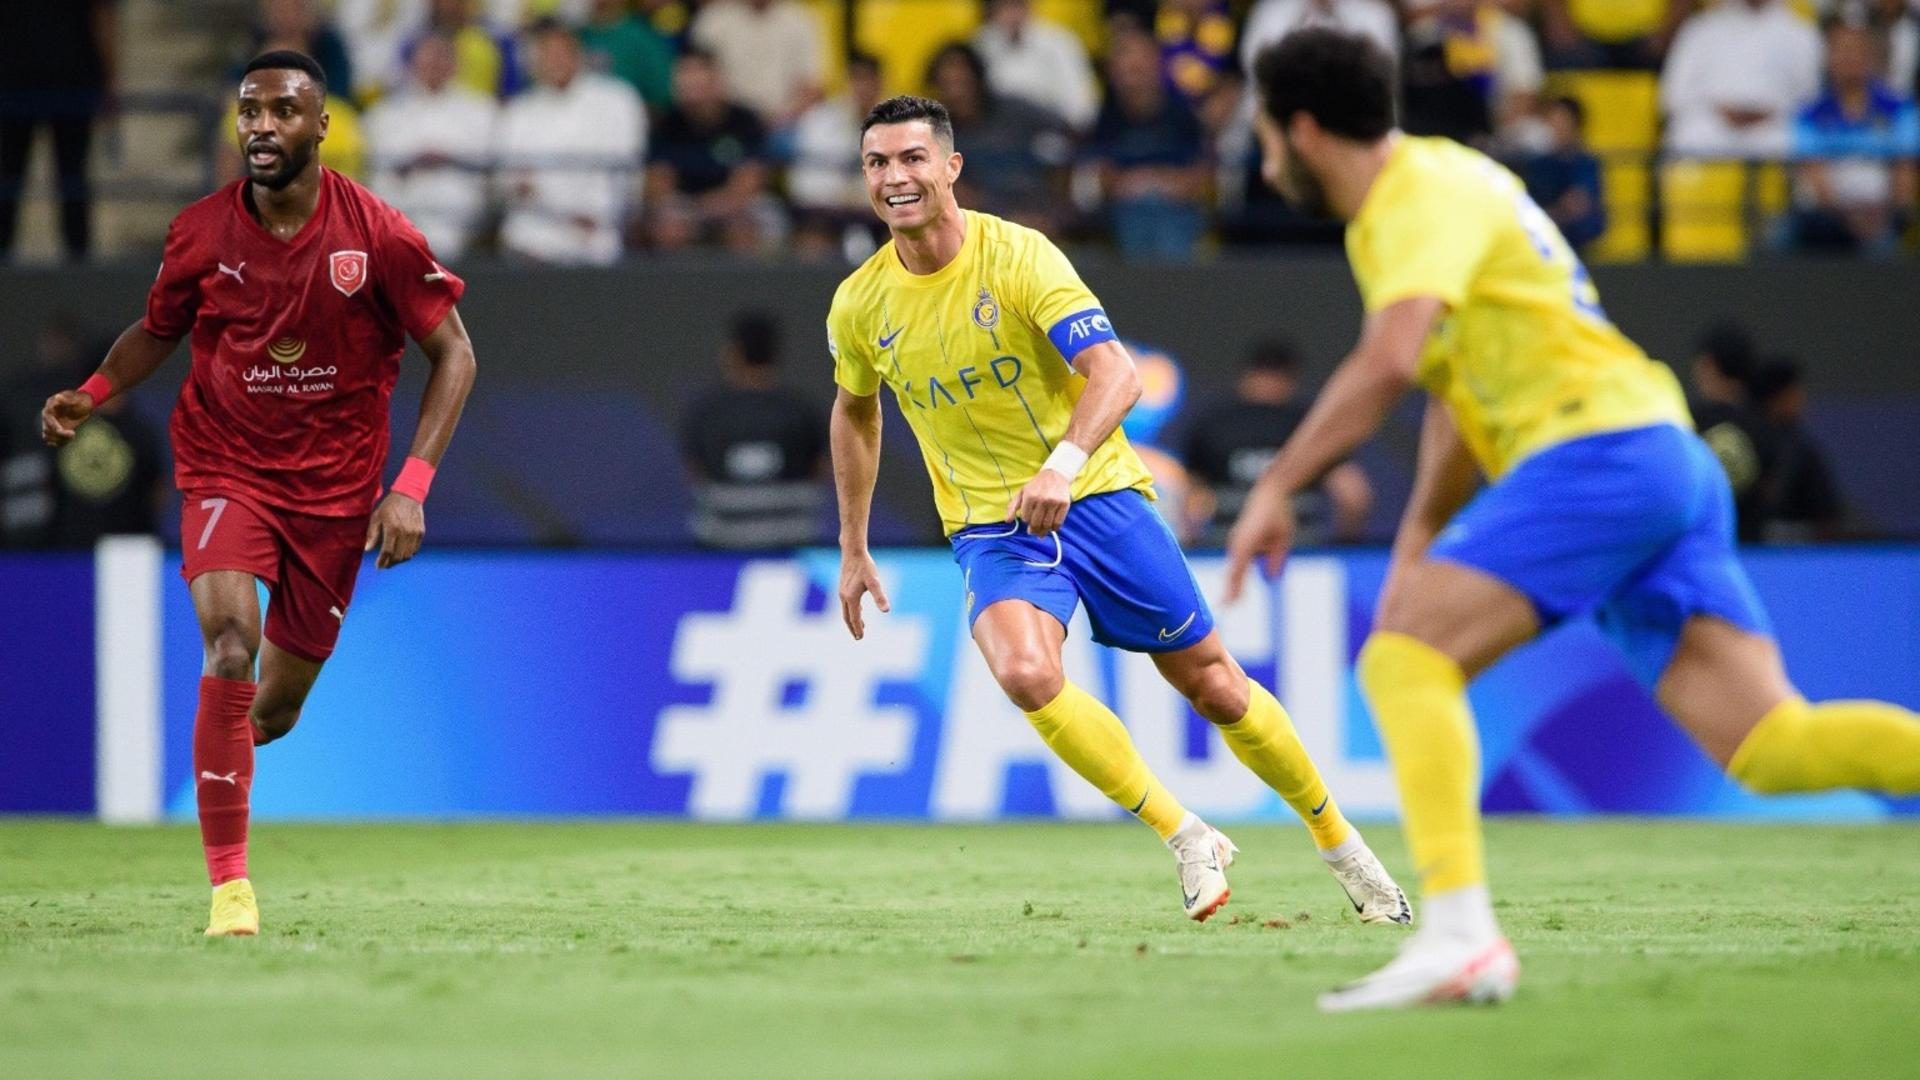 Al Duhail vs Al Nassr AFC Champions League Match: Date, Time, Venue: Where  To Watch Live Streaming and Telecast in India